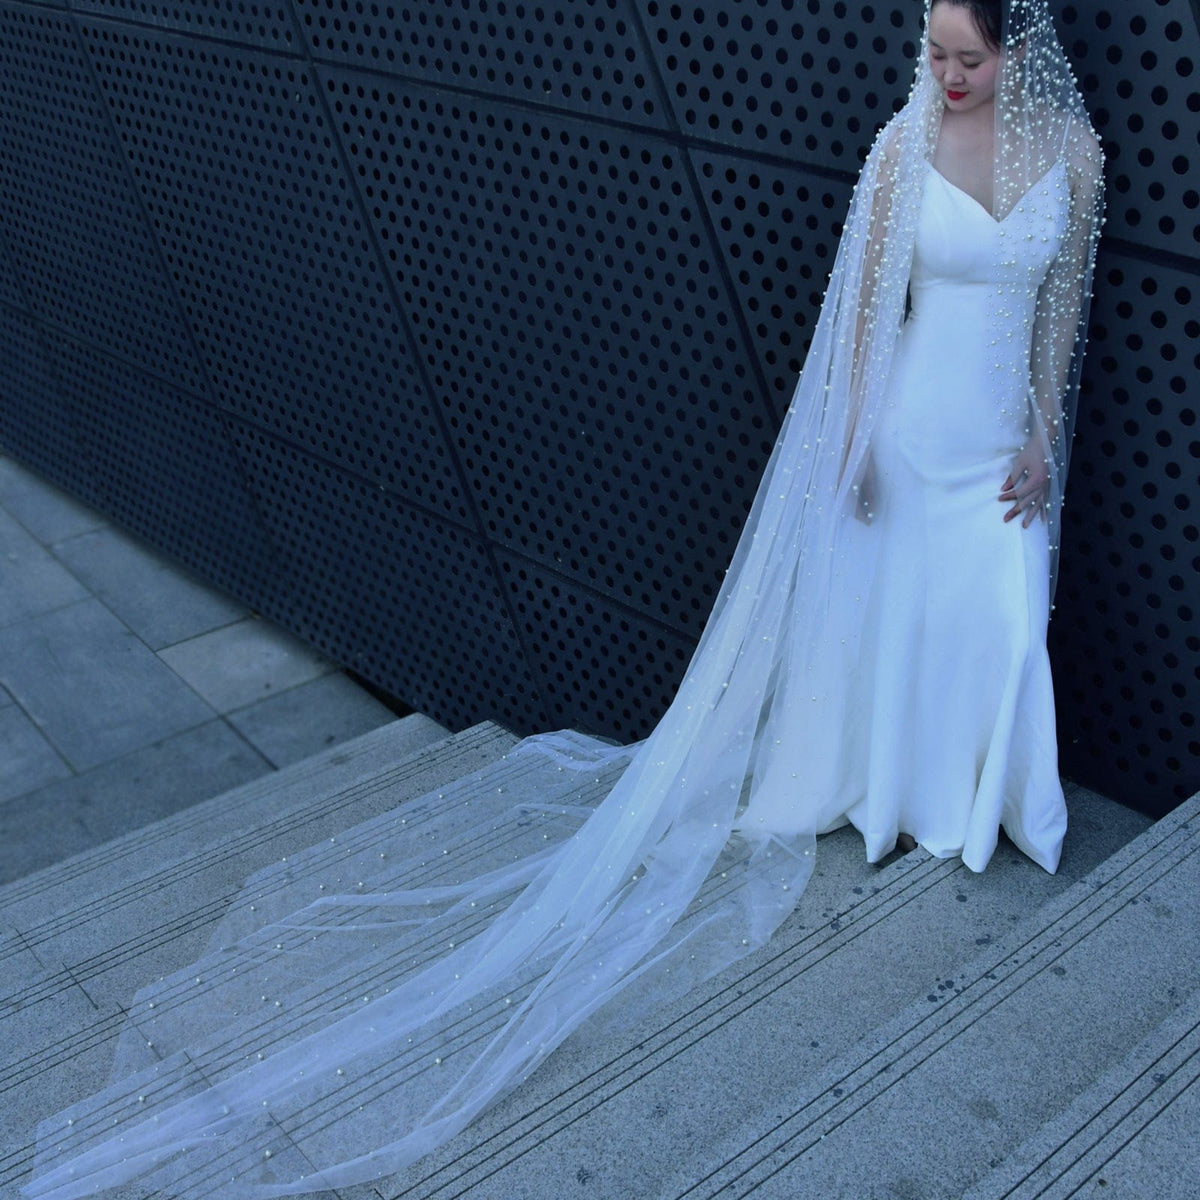 One-Tier Cut Edge Tulle Chapel Veils With Pearls V139